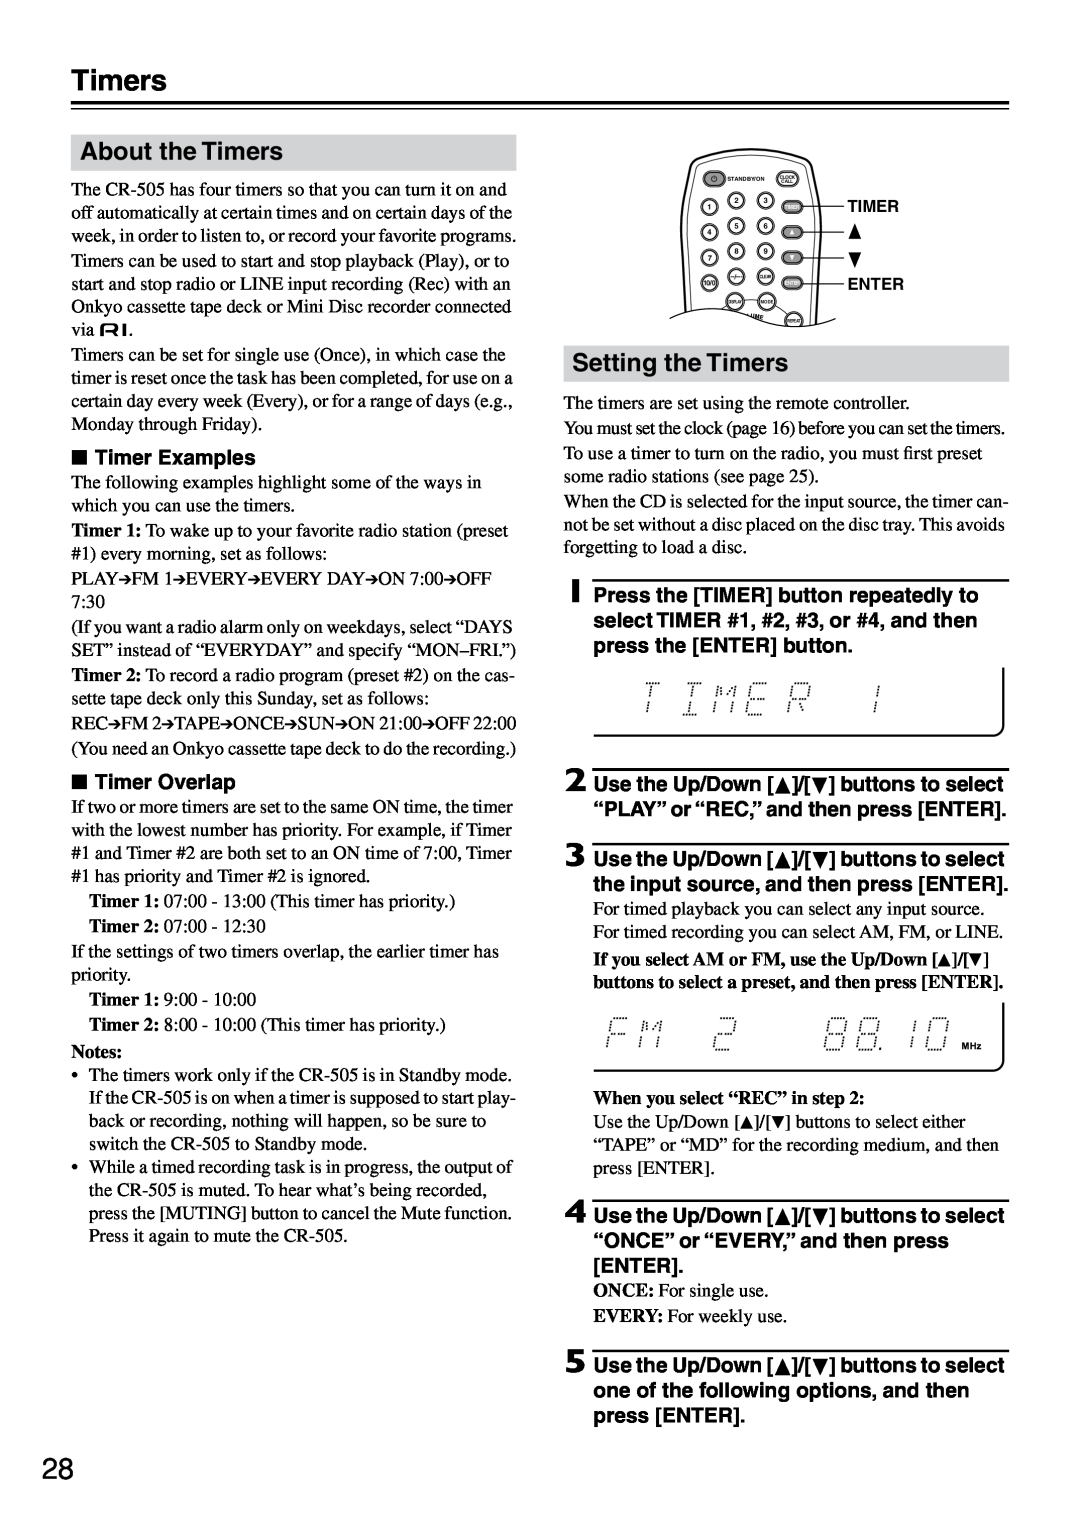 Onkyo CR-505 instruction manual About the Timers, Setting the Timers 